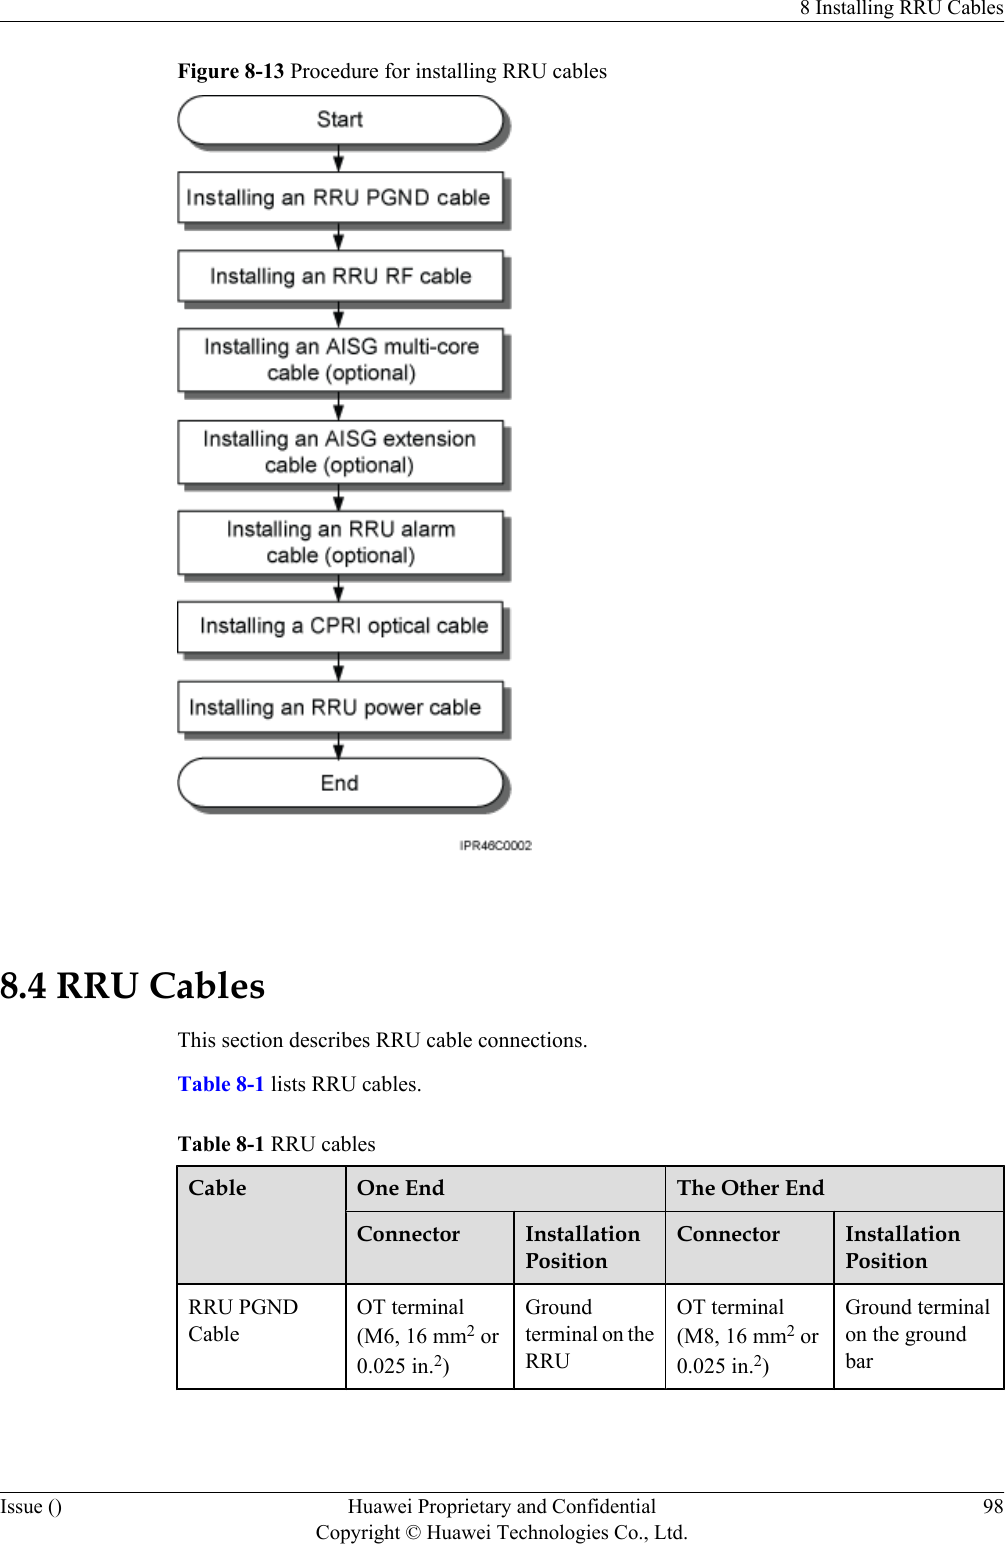 Figure 8-13 Procedure for installing RRU cables 8.4 RRU CablesThis section describes RRU cable connections.Table 8-1 lists RRU cables.Table 8-1 RRU cablesCable One End The Other EndConnector InstallationPositionConnector InstallationPositionRRU PGNDCableOT terminal(M6, 16 mm2 or0.025 in.2)Groundterminal on theRRUOT terminal(M8, 16 mm2 or0.025 in.2)Ground terminalon the groundbar8 Installing RRU CablesIssue () Huawei Proprietary and ConfidentialCopyright © Huawei Technologies Co., Ltd.98